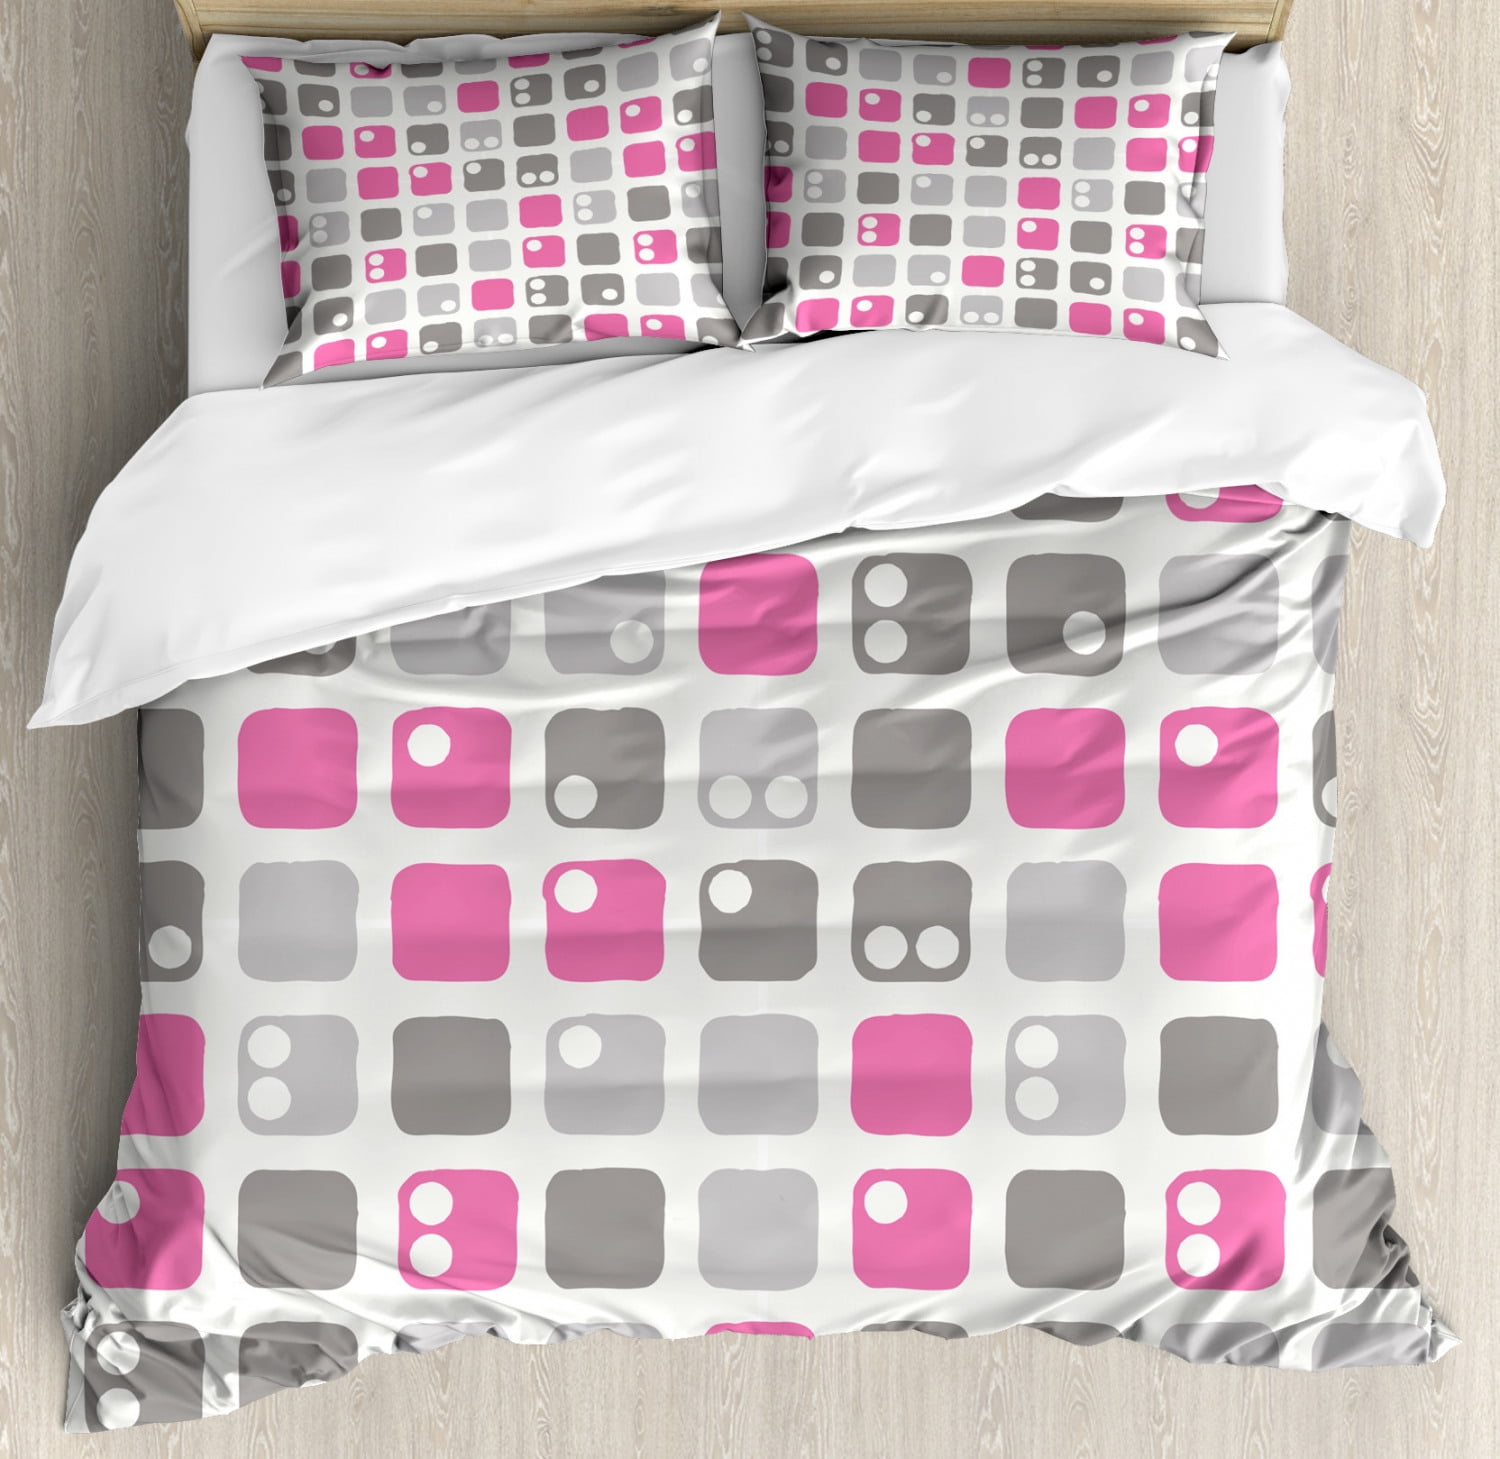 Geometric Duvet Cover Set Square Shapes With Dots In Pastel Color